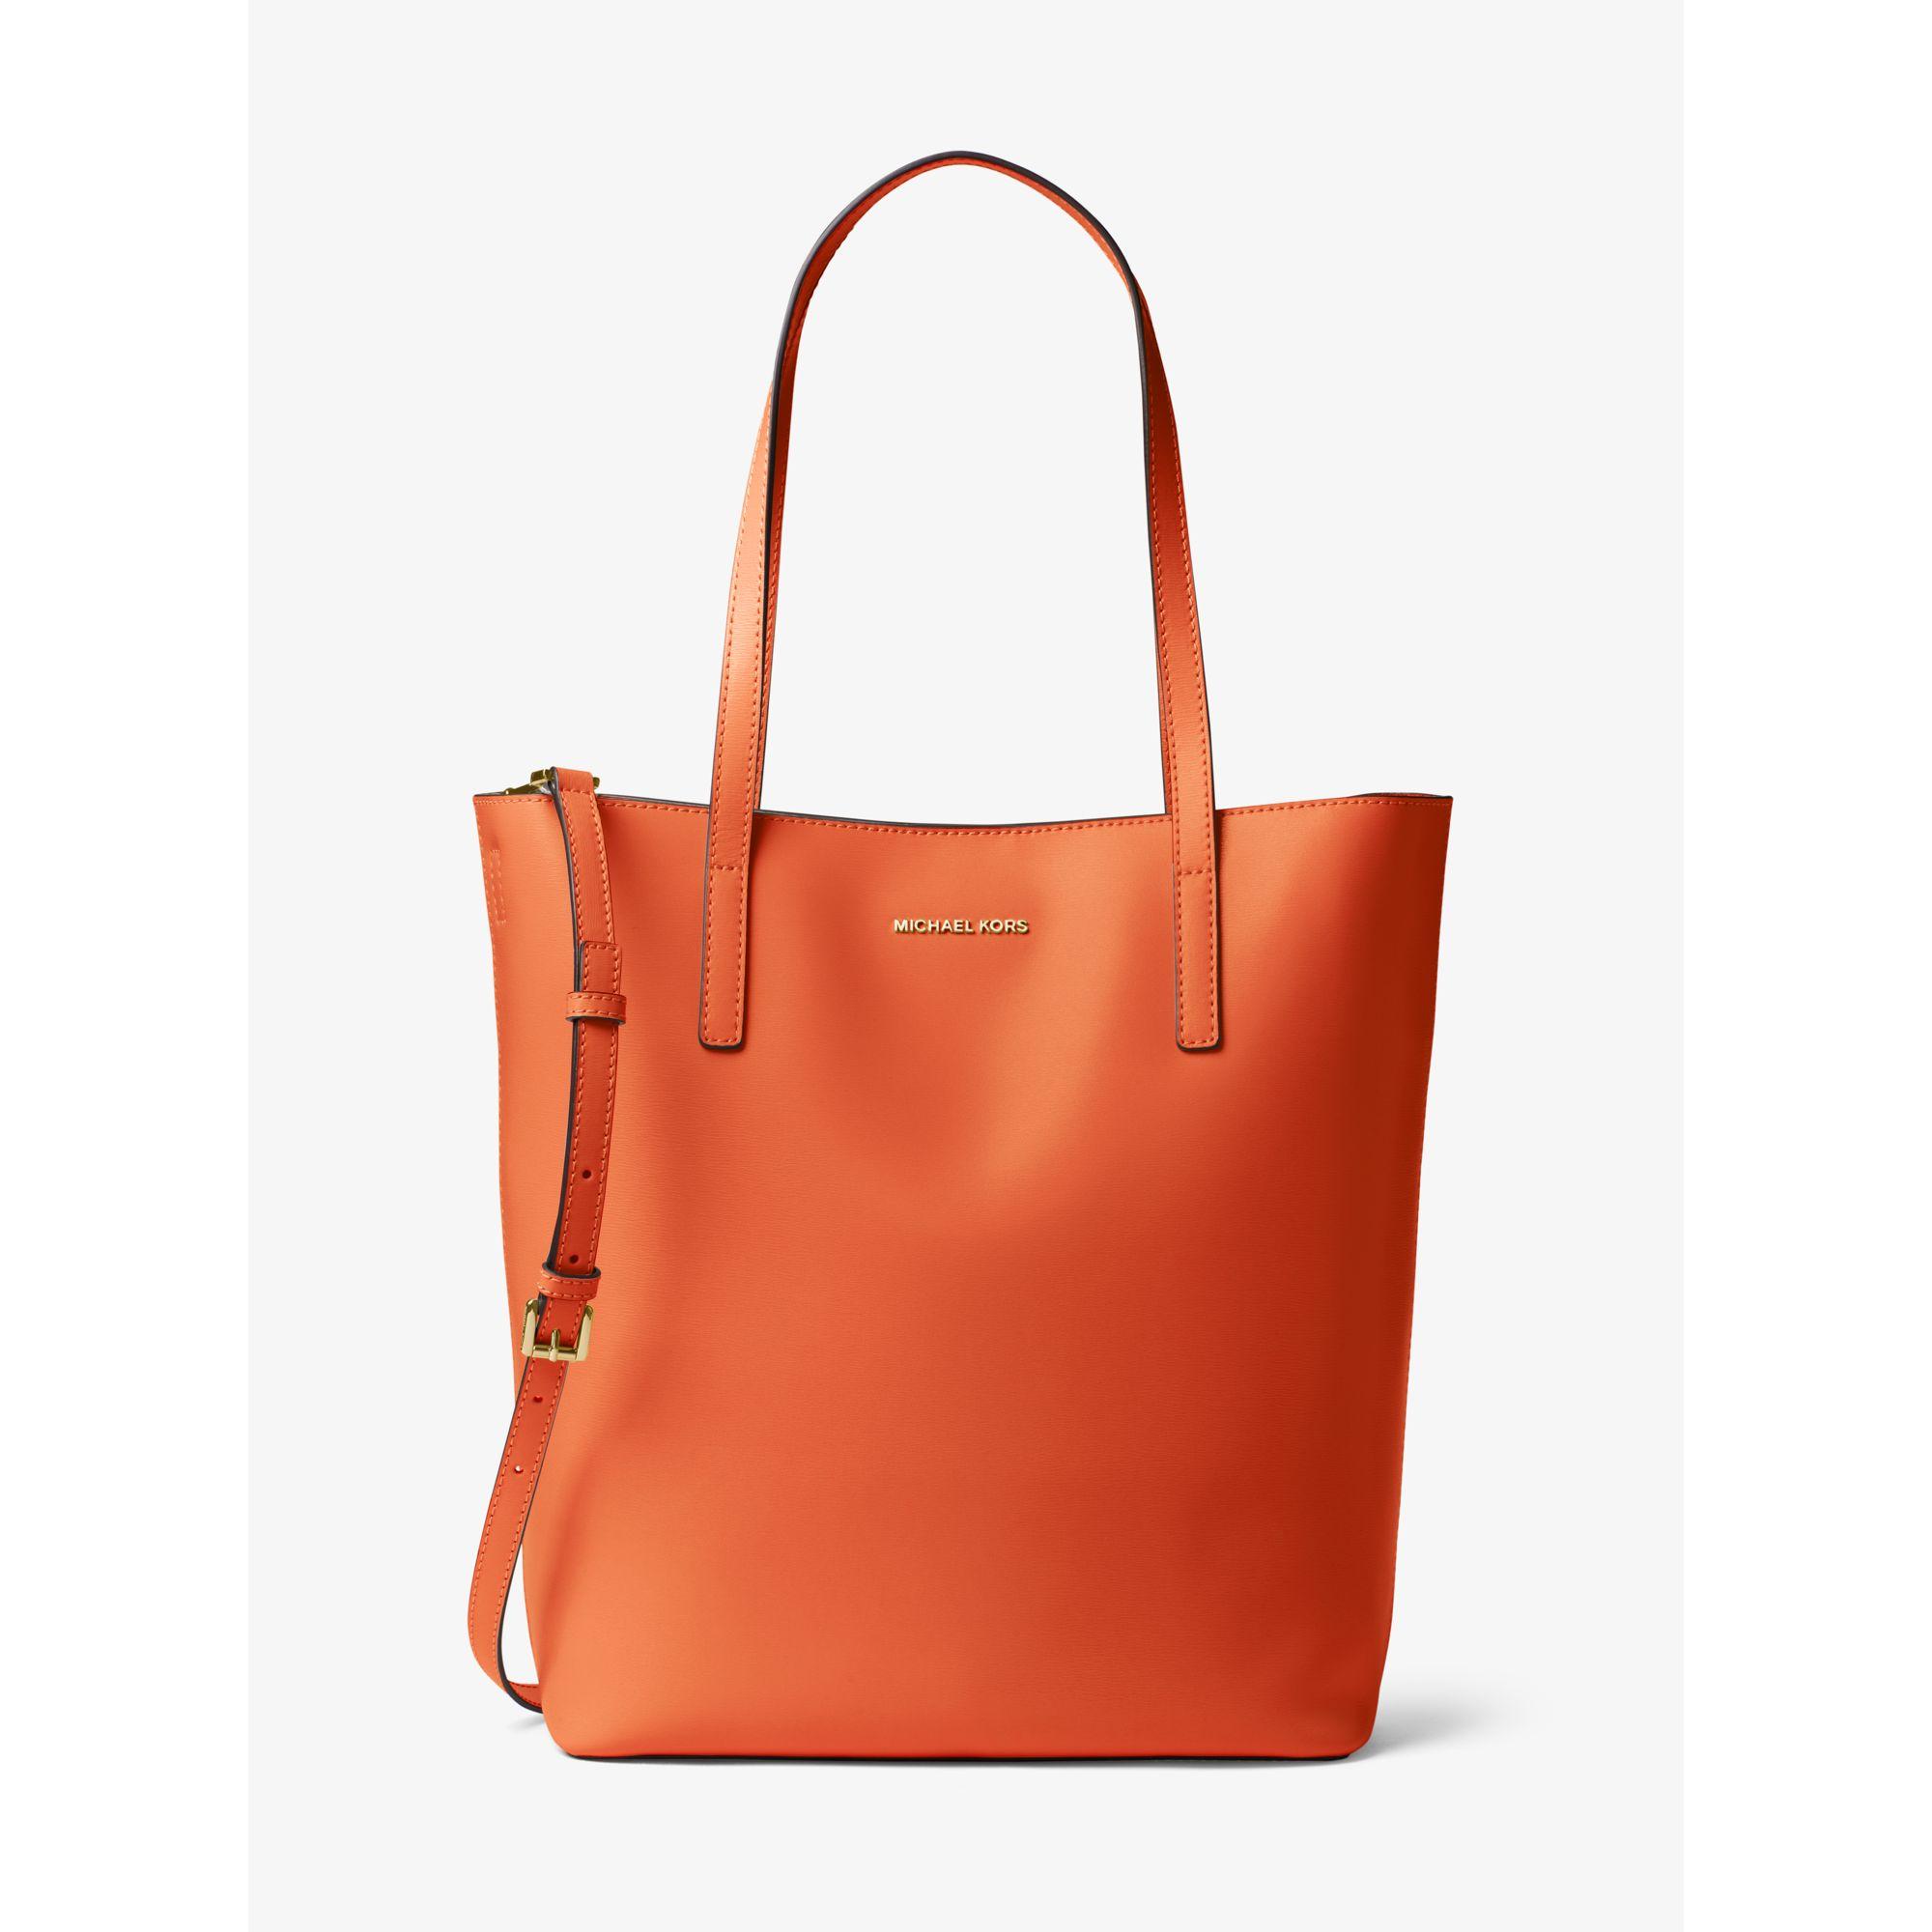 Michael Kors Emry Large Leather Tote in Orange - Lyst